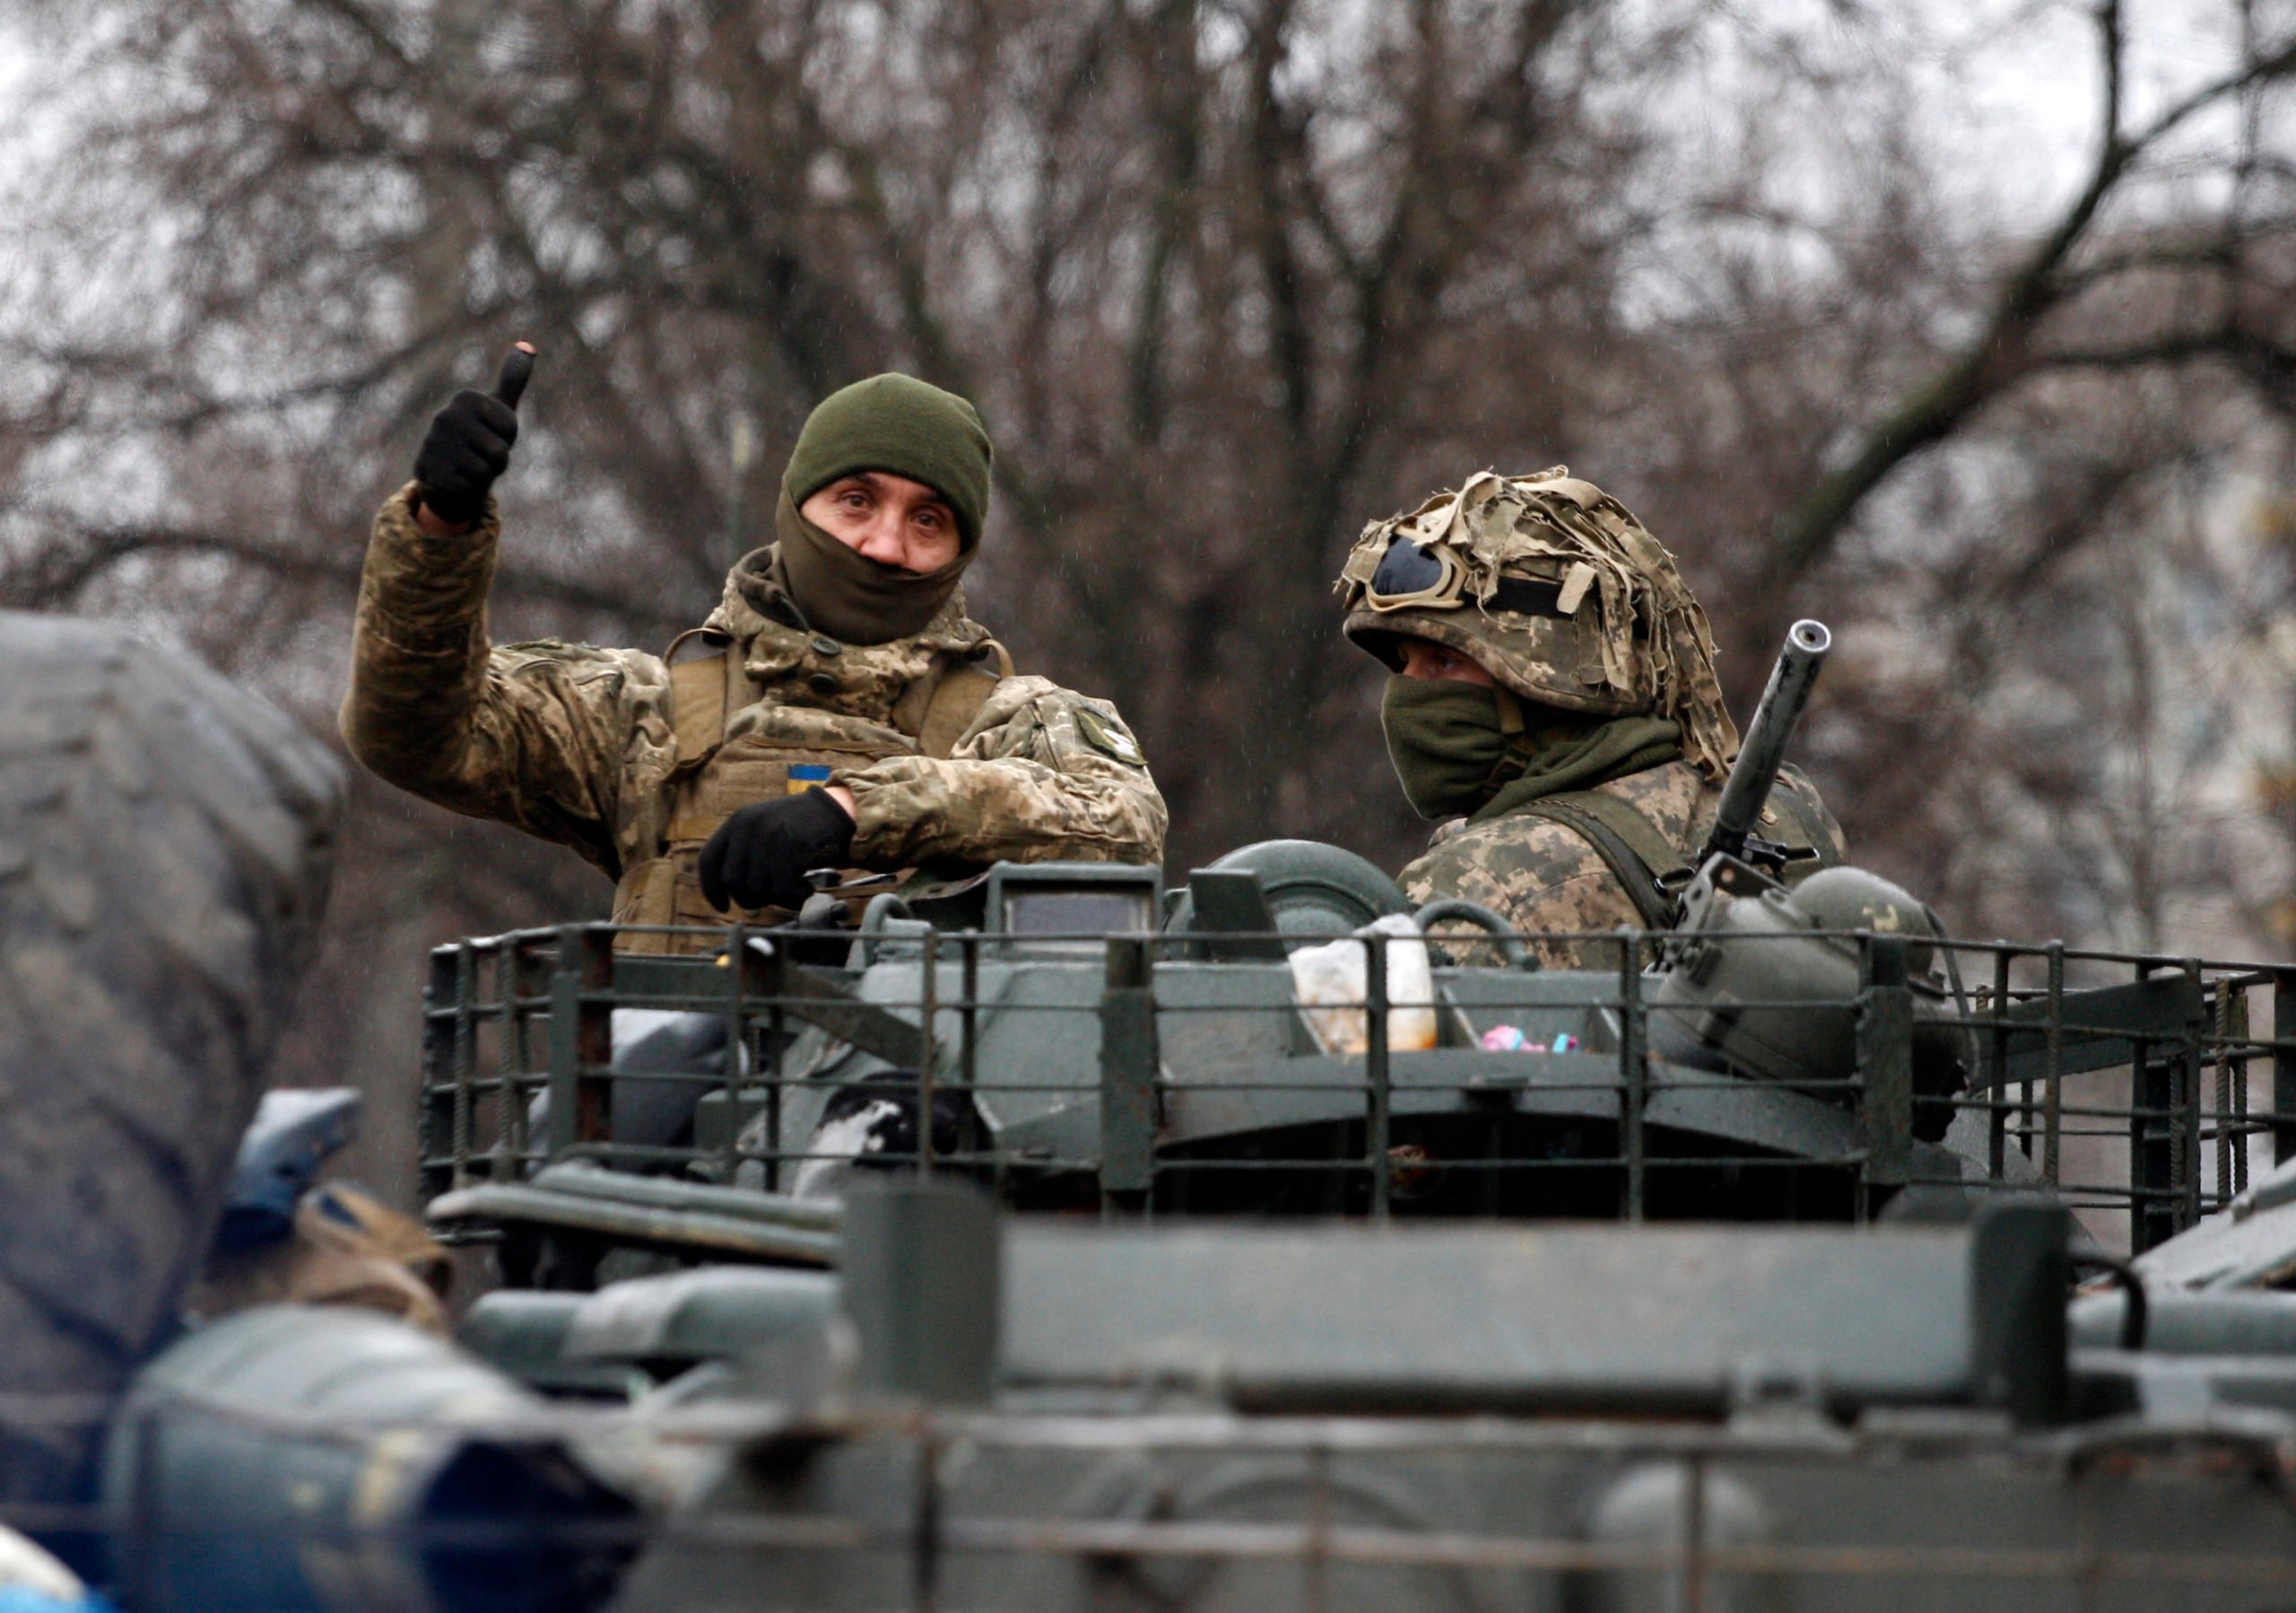 A Ukrainian serviceman gives a thumb up riding atop a military vehicle before an attack in Lugansk region on February 26, 2022. - Russia on February 26 ordered its troops to advance in Ukraine "from all directions" as the Ukrainian capital Kyiv imposed a blanket curfew and officials reported 198 civilian deaths. (Photo by Anatolii Stepanov / AFP) (Photo by ANATOLII STEPANOV/AFP via Getty Images)